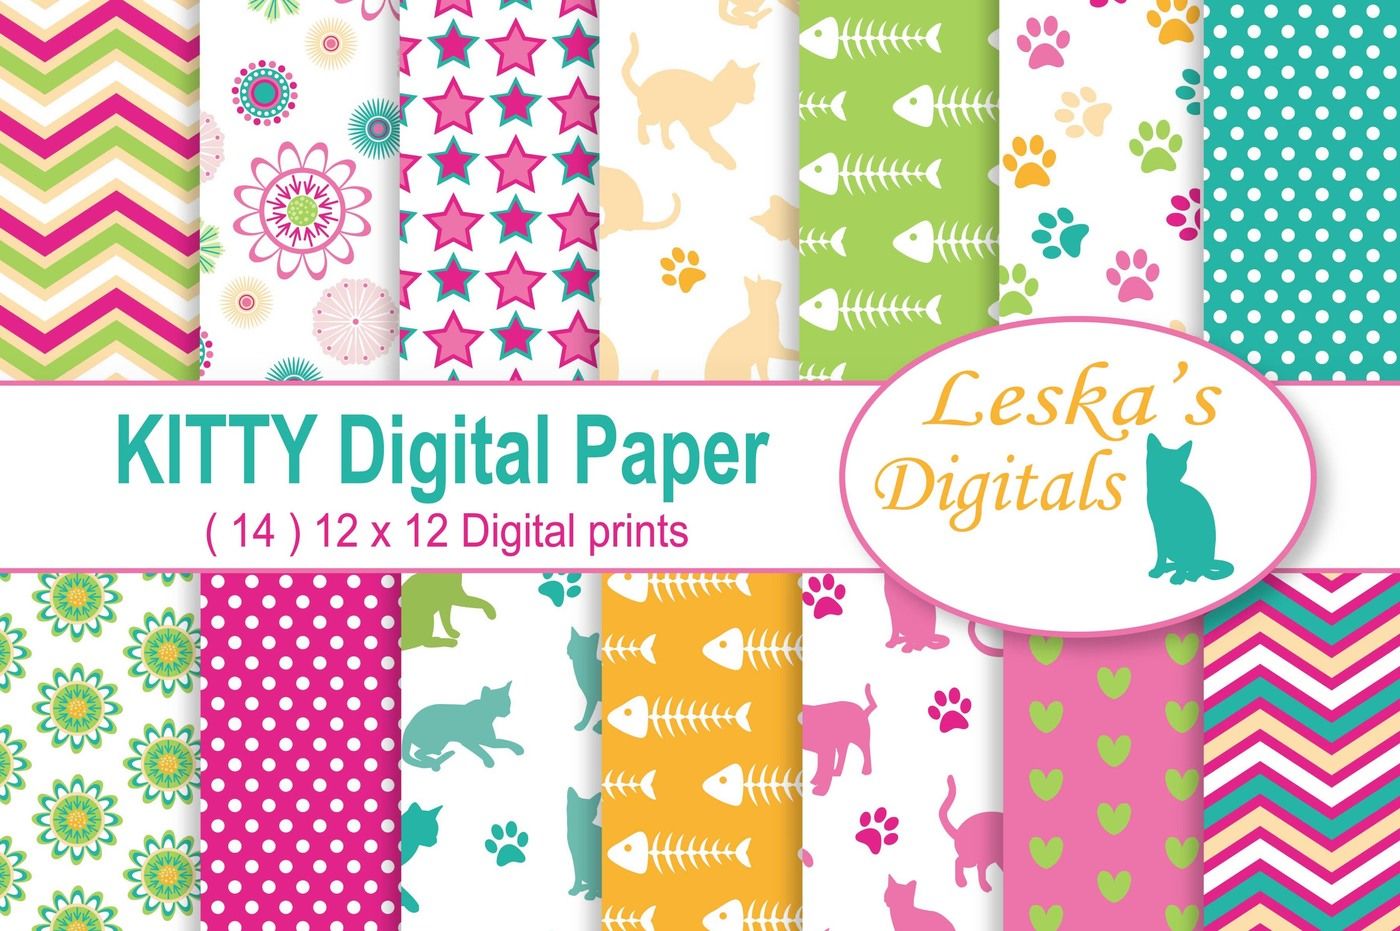 PSP Tagger Tube Unicorn Cats Fantasy Digital Scrapbooking Download PSD Graphic Purrfect Friends